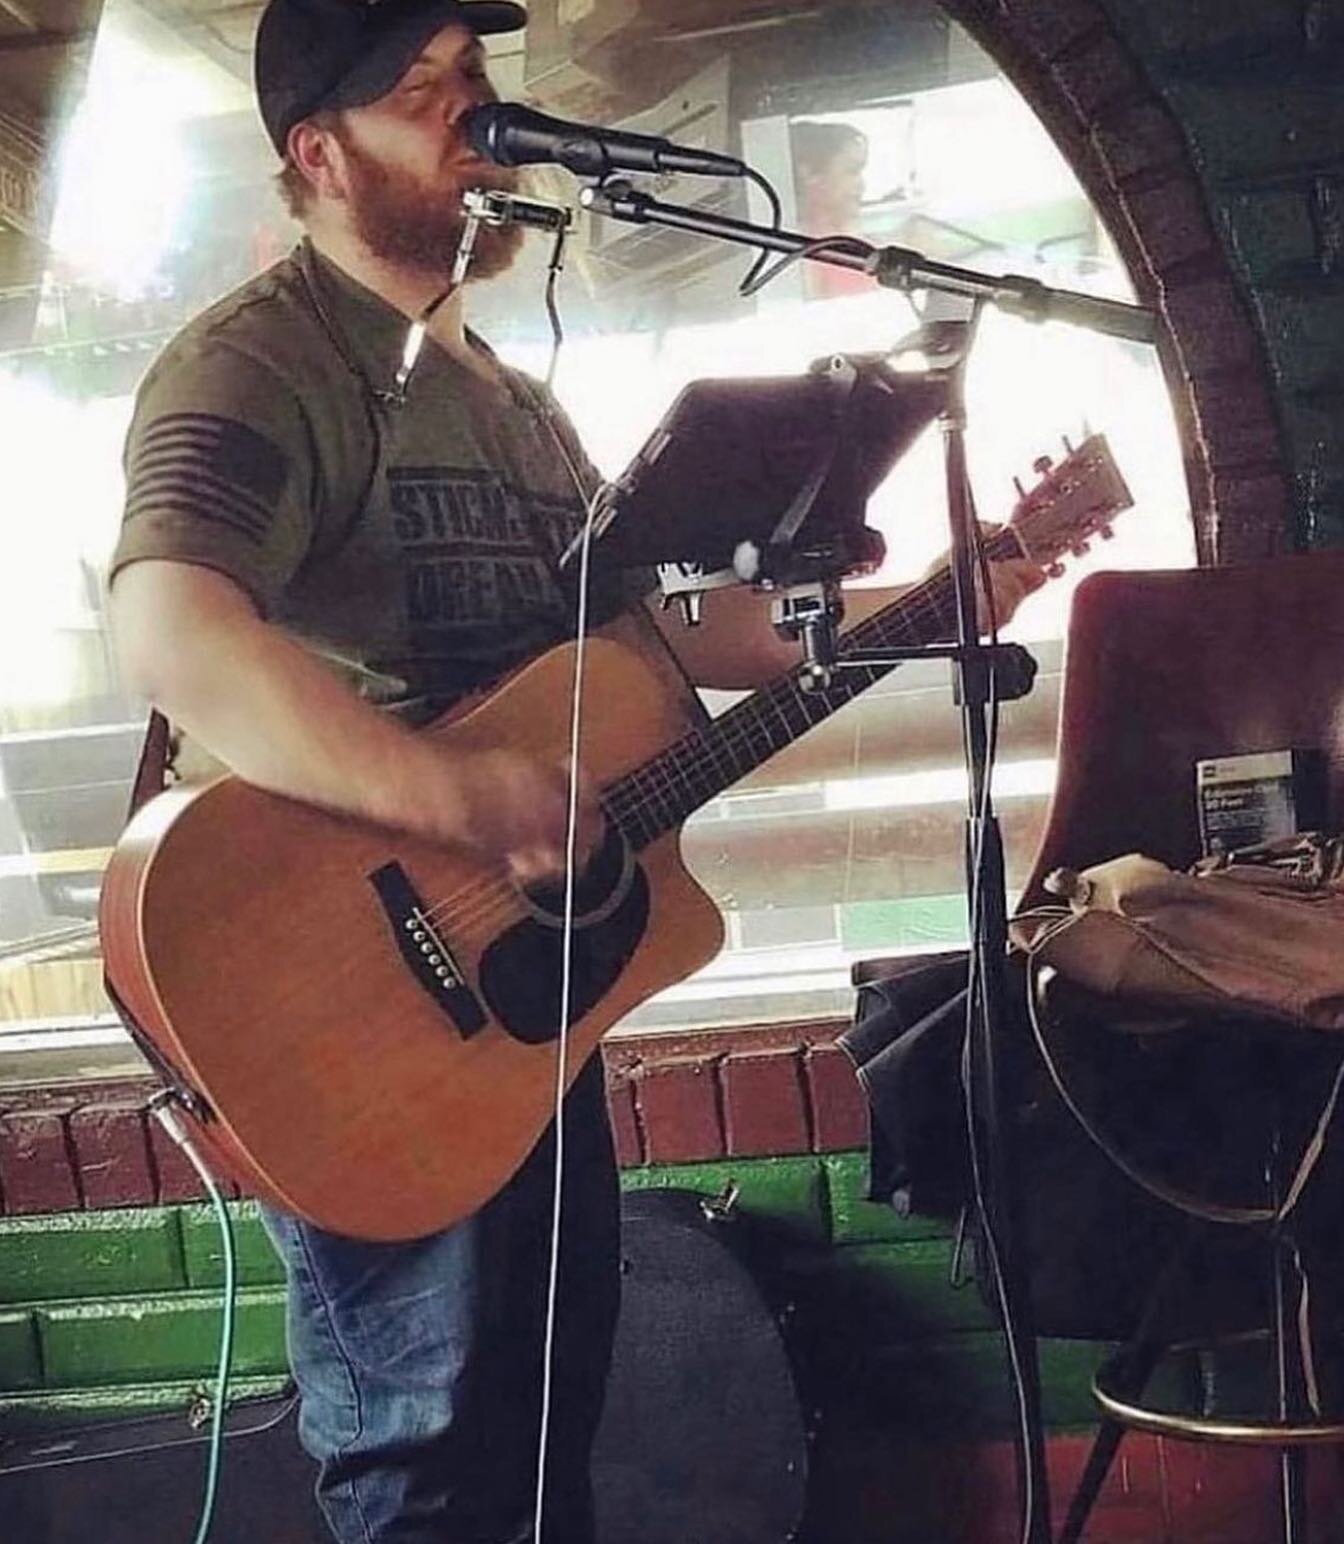 We had so much fun last night with live music from @smith.andrew1219 ! Now it&rsquo;s time for our other favorite Andrew to play, @katterandrew ! Andrew Katter on the mic TONIGHT from 8-11 PM! See y&rsquo;all then🍻🍻🍻 #GREENLINEBREWERY